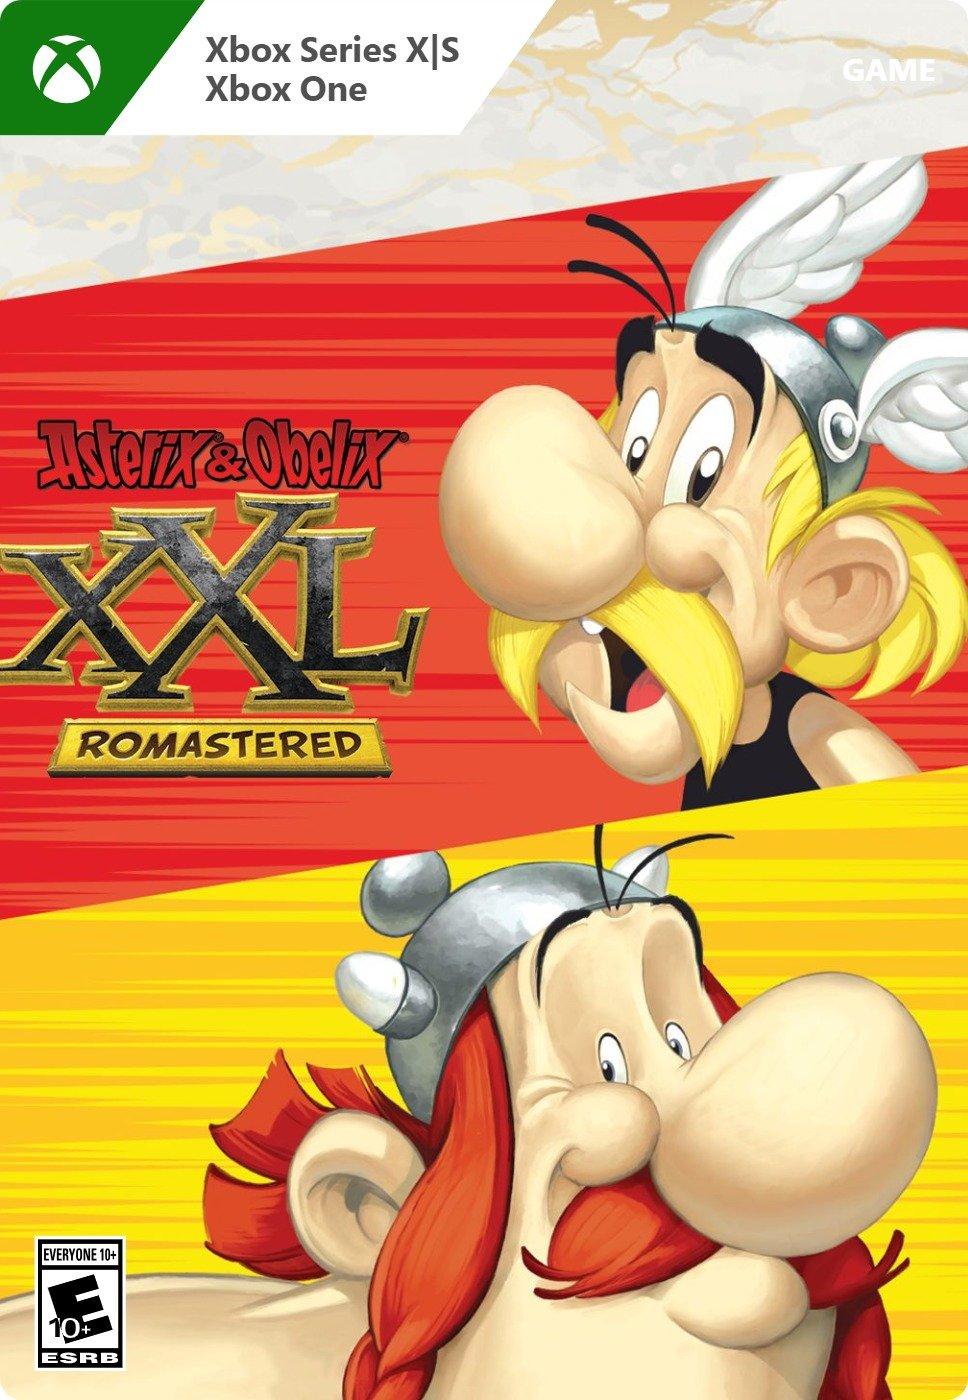 Asterix and Obelix XXL: Romastered - Xbox Series X/S